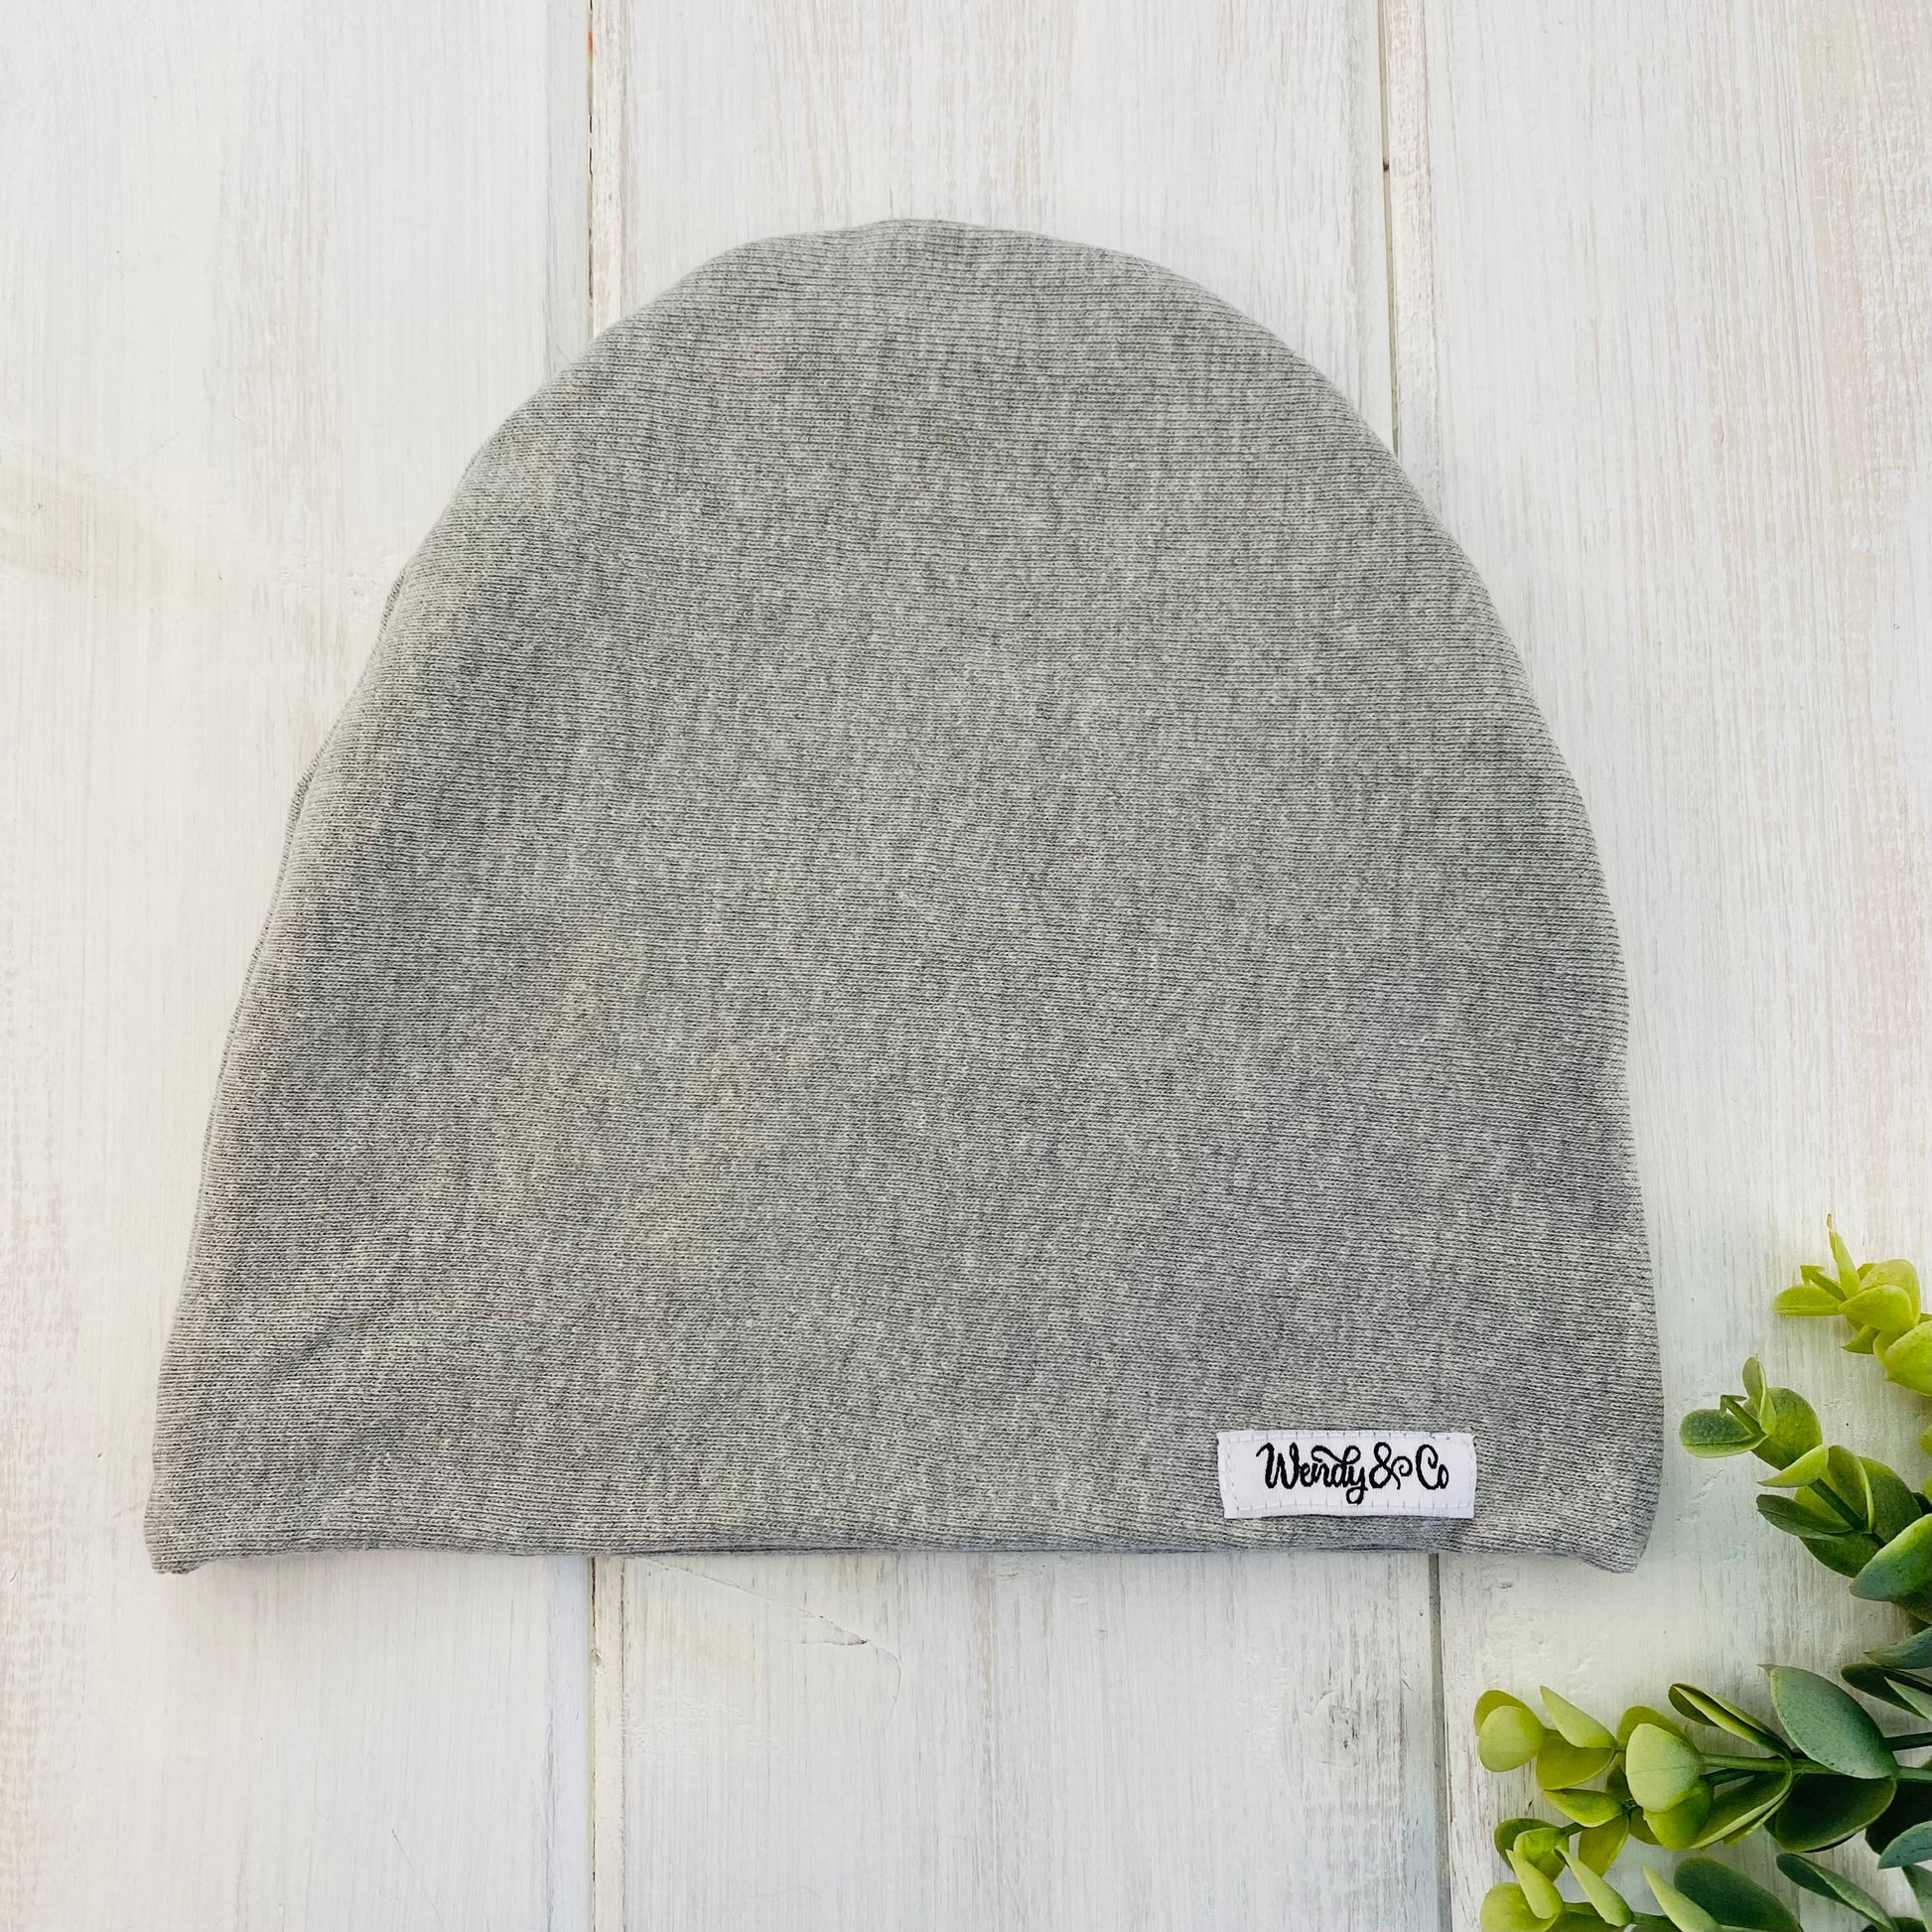 Super soft gray beanie in modern slouchy fit.